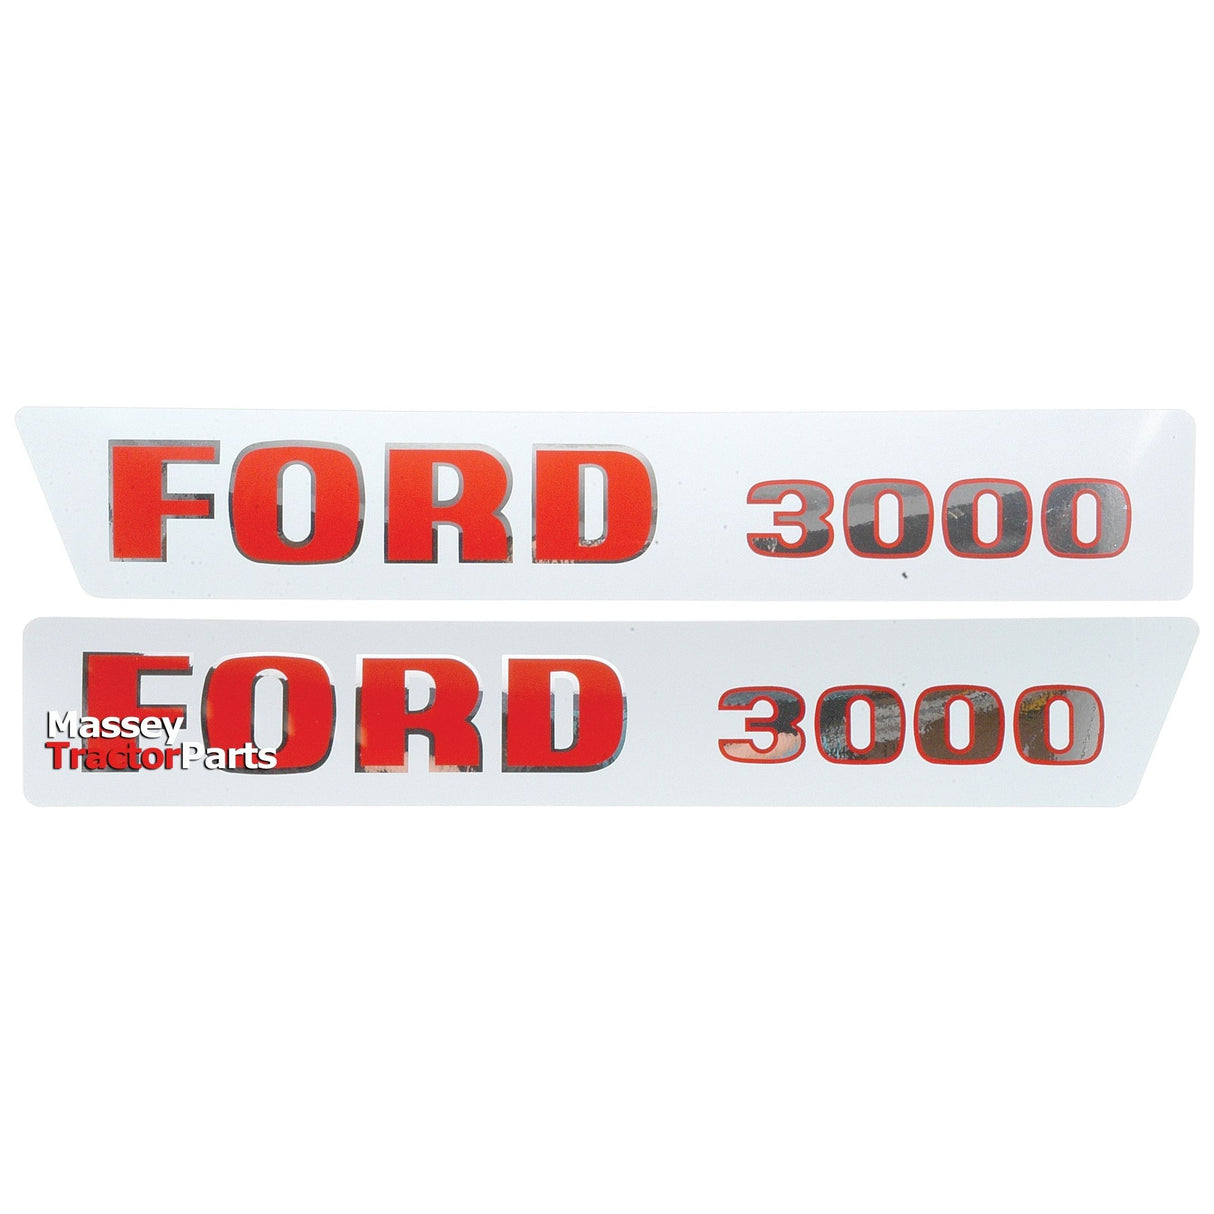 Decal Set - Ford / New Holland 3000
 - S.8535 - Massey Tractor Parts